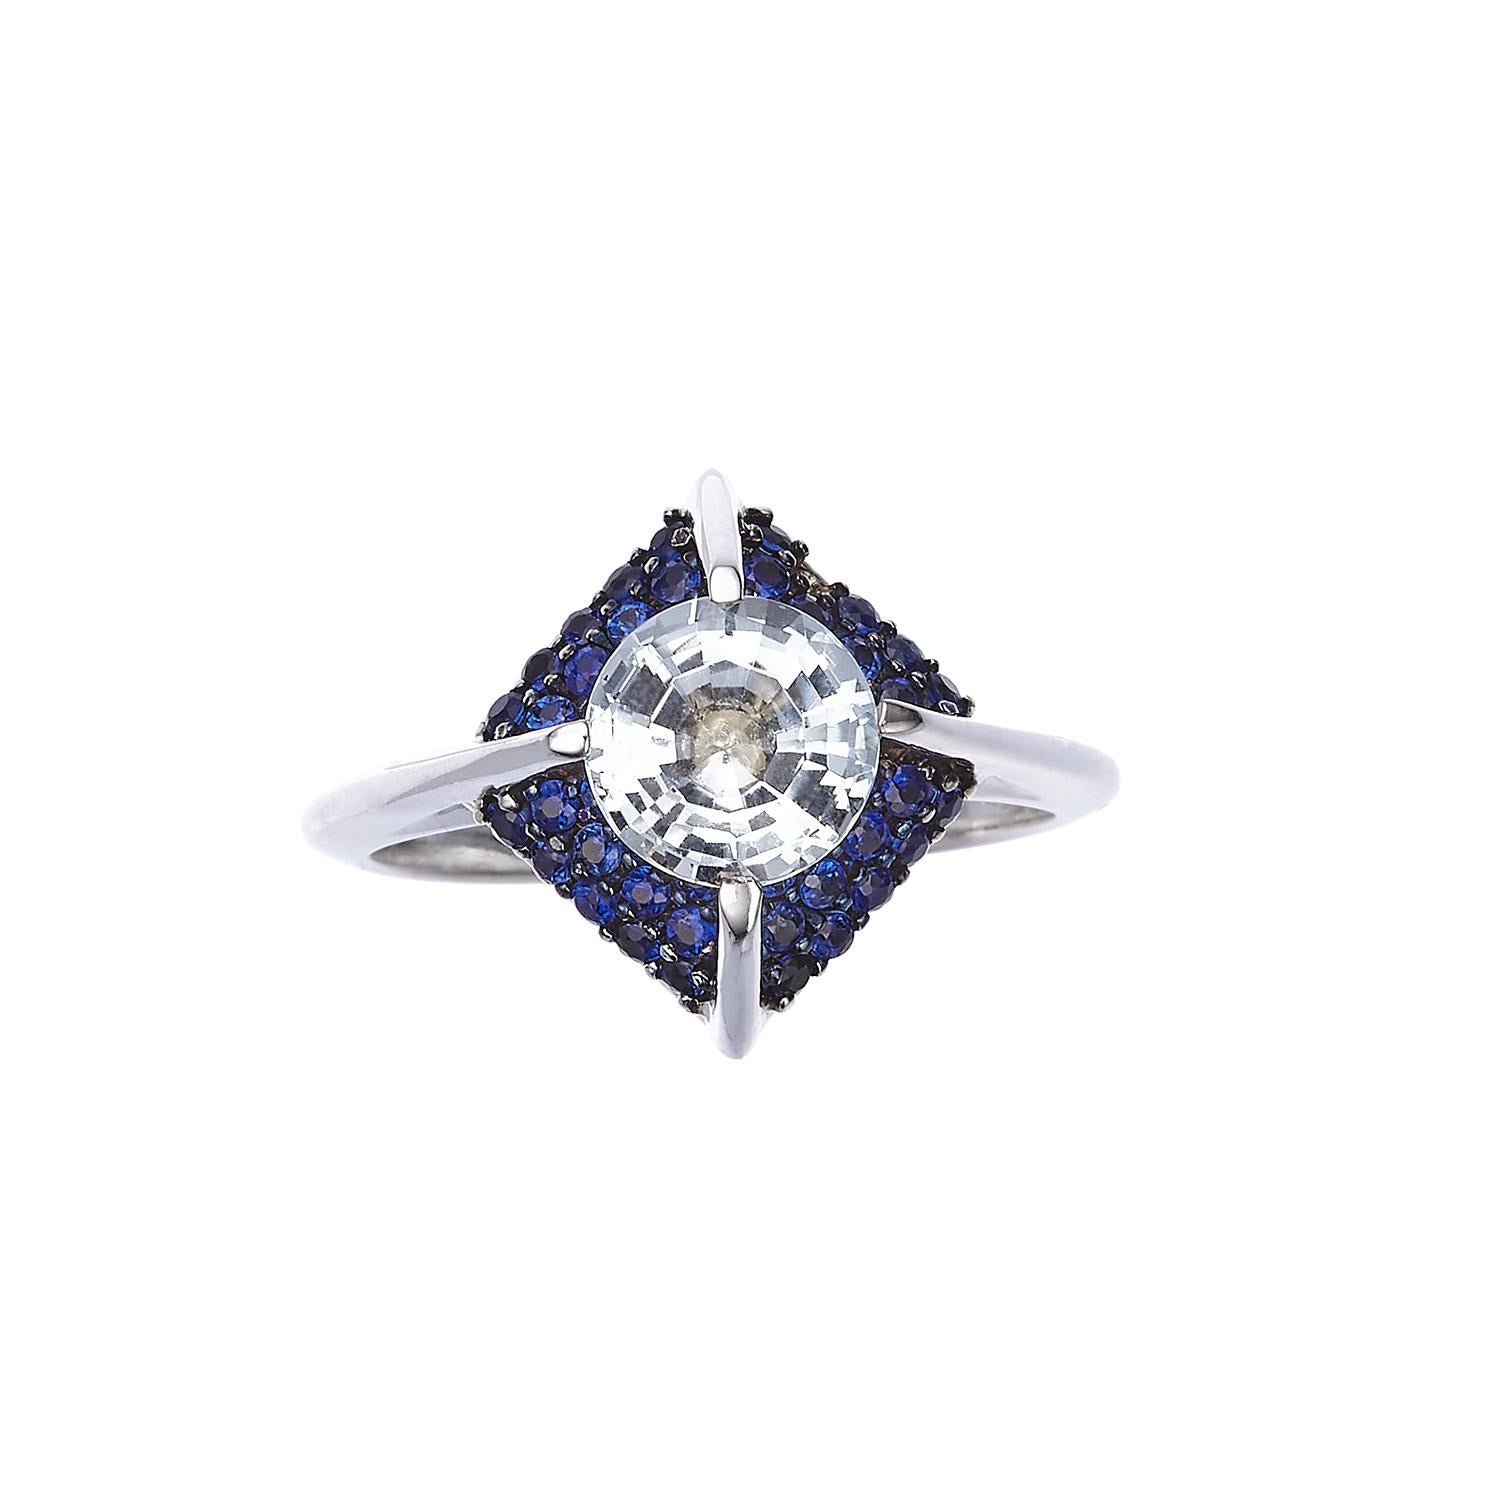 For Sale:  18K White Gold Made in Italy Diamond Rodolite Garnet Vogue Awarded Cocktail Ring 18